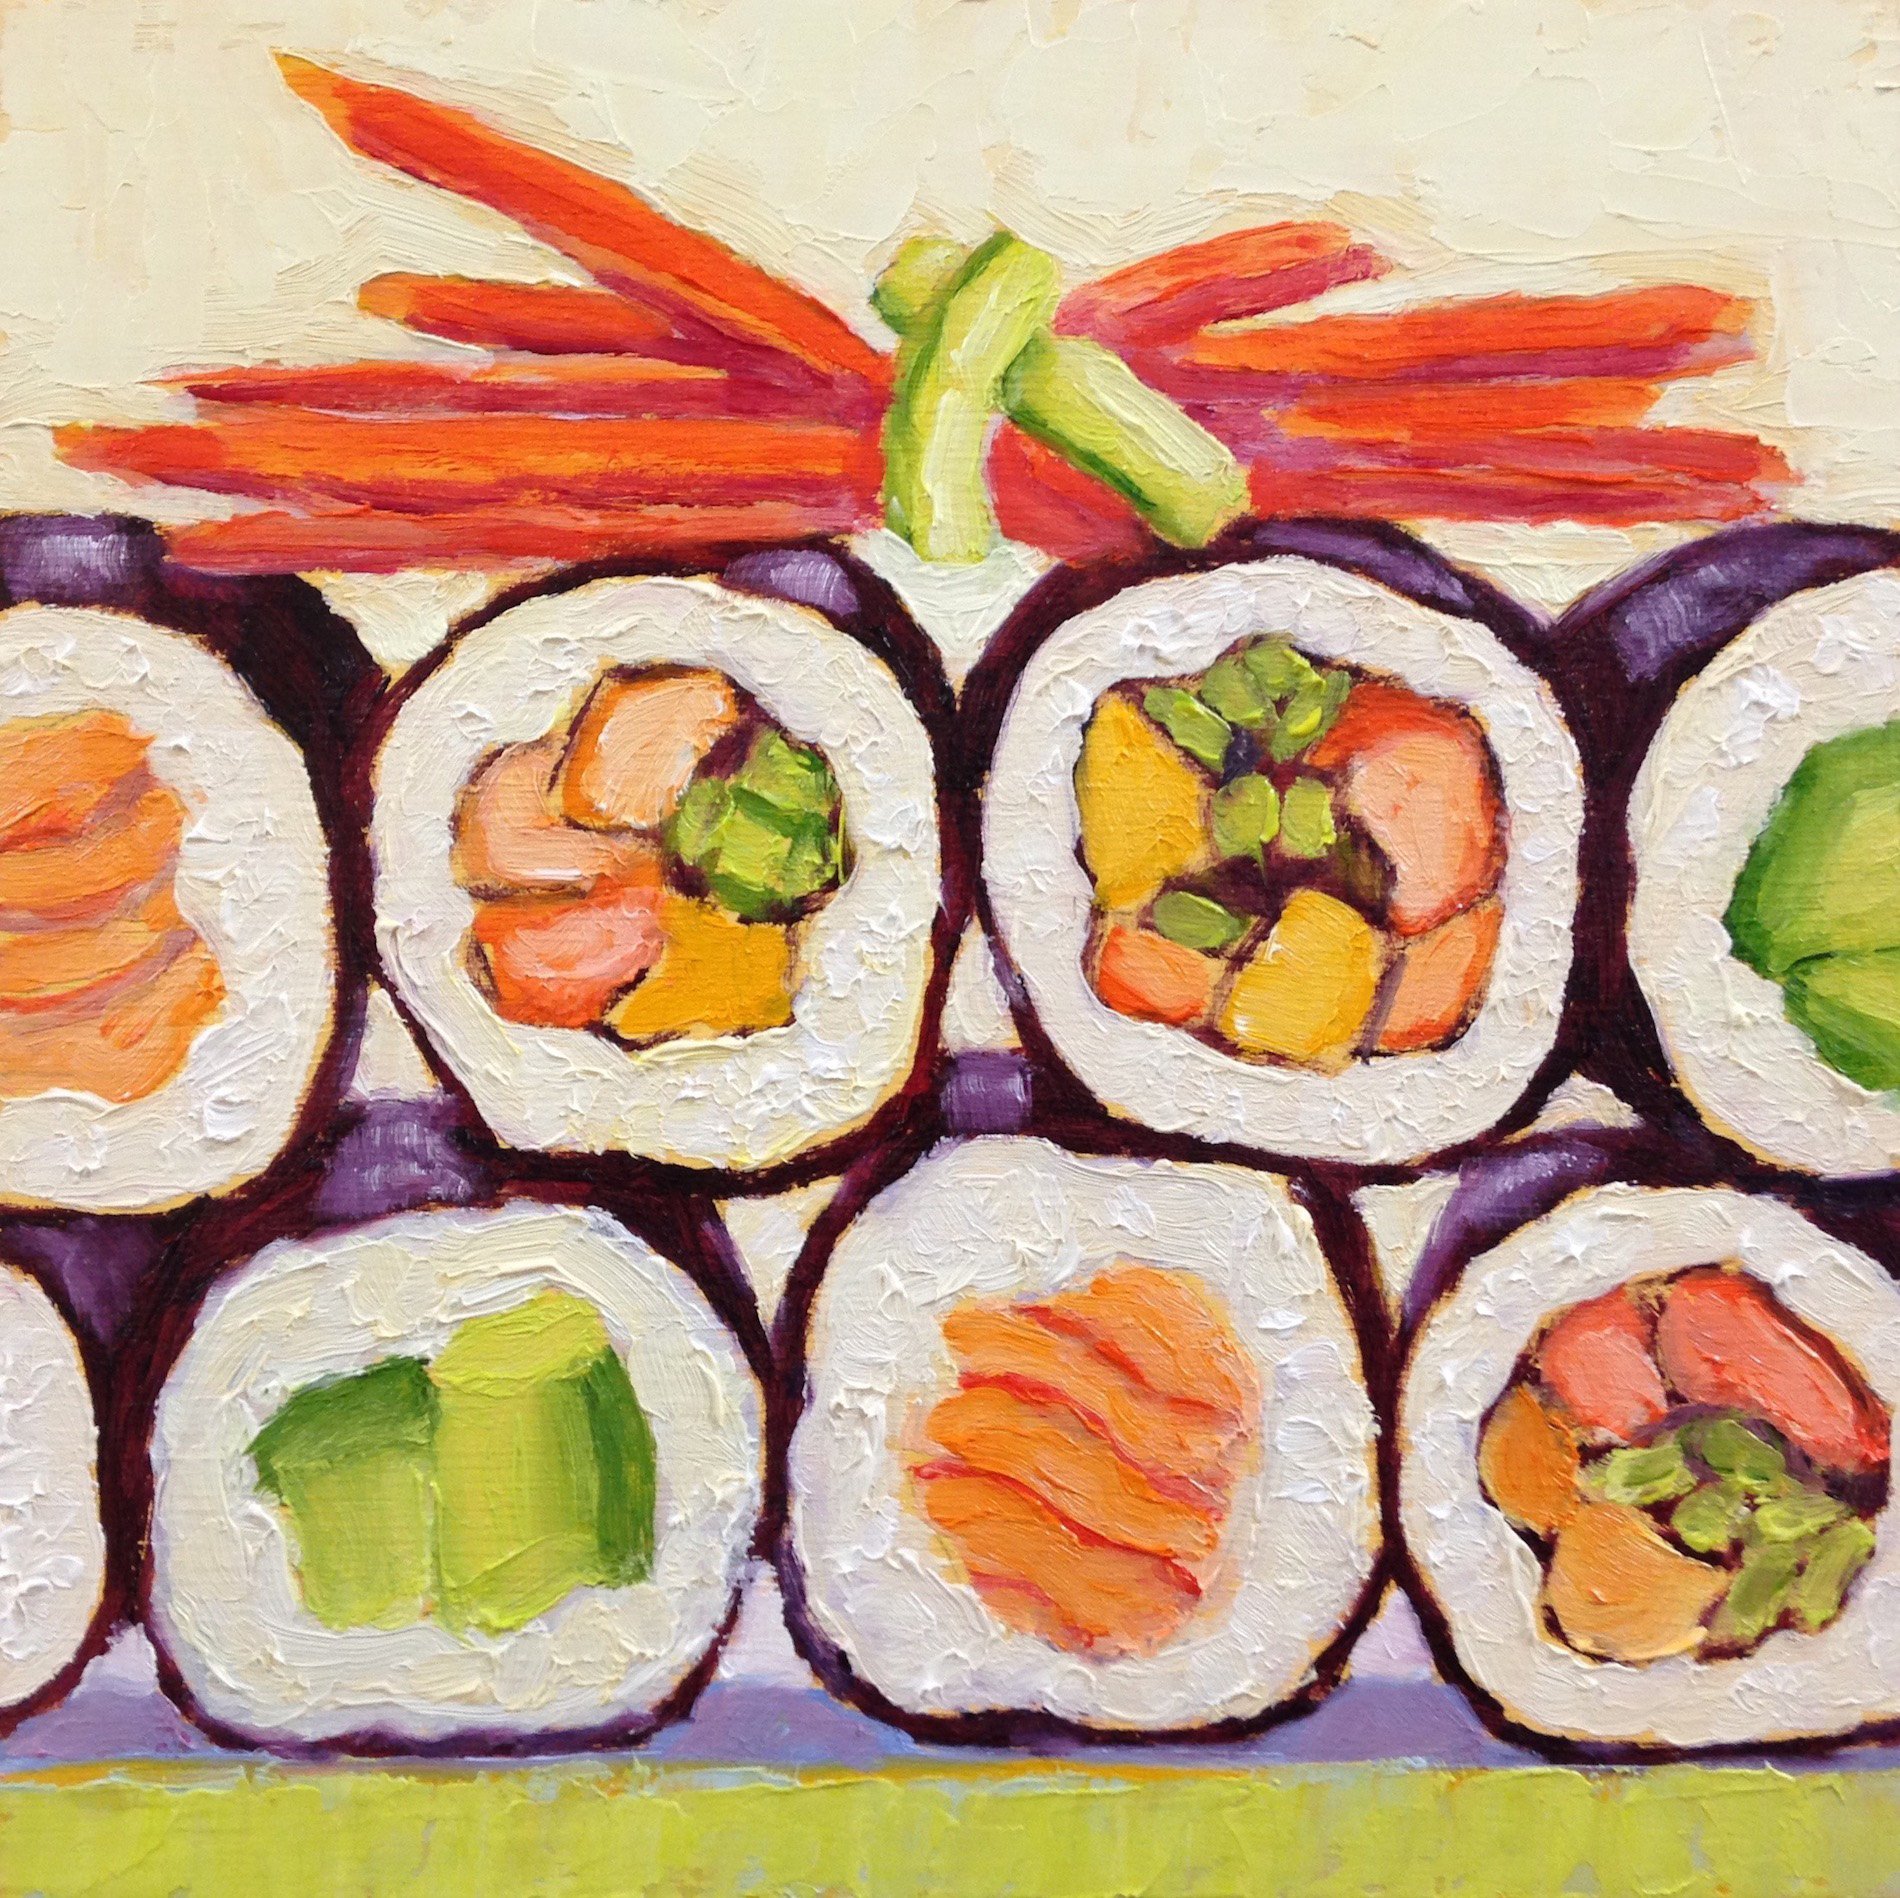 California Rolls by Pat Doherty